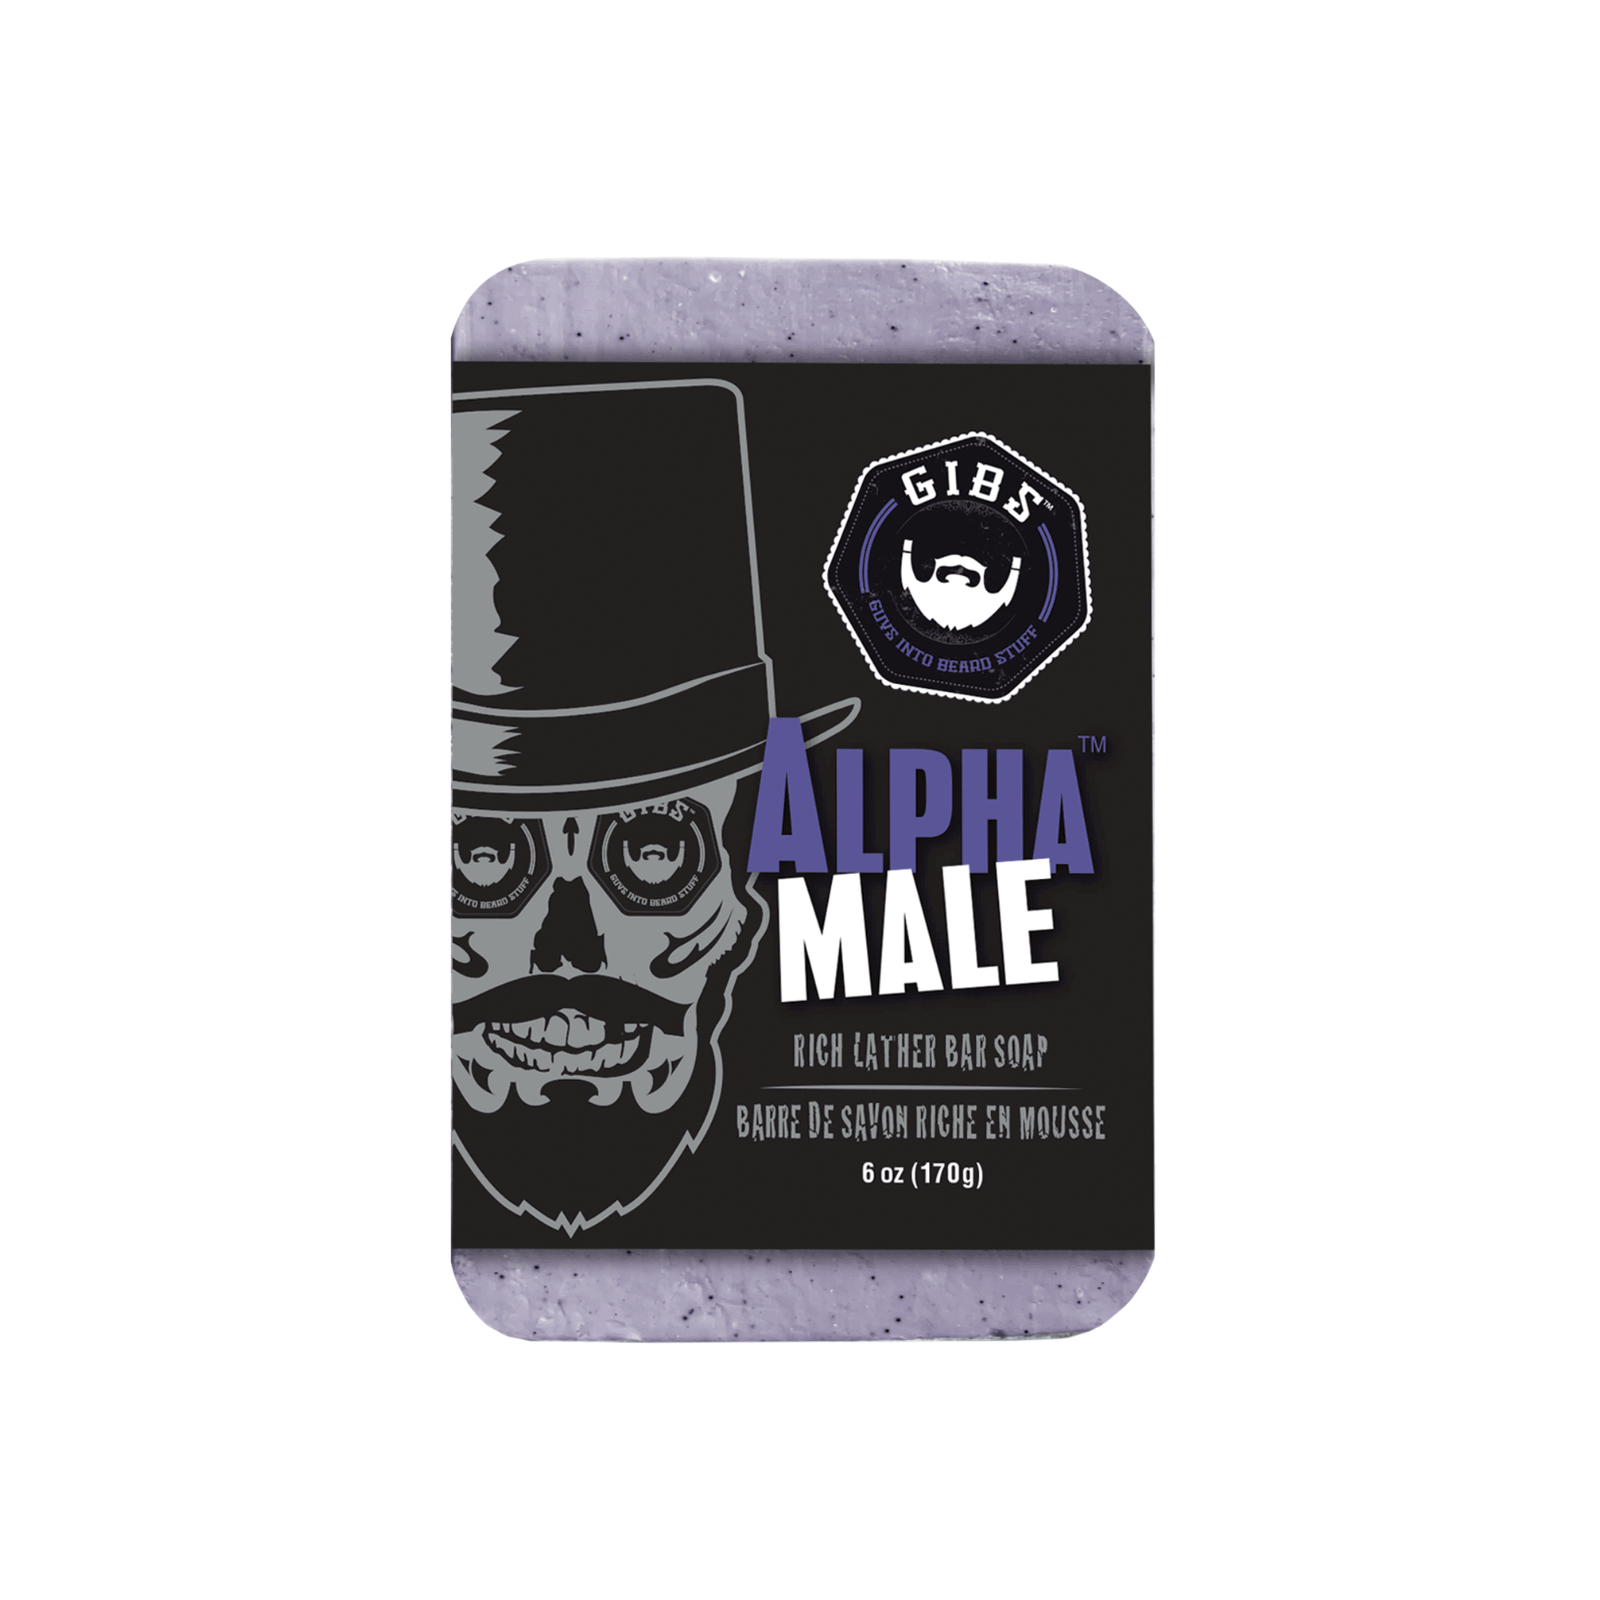 GIBS Grooming - Alpha Male Exfoliating Bar Soap